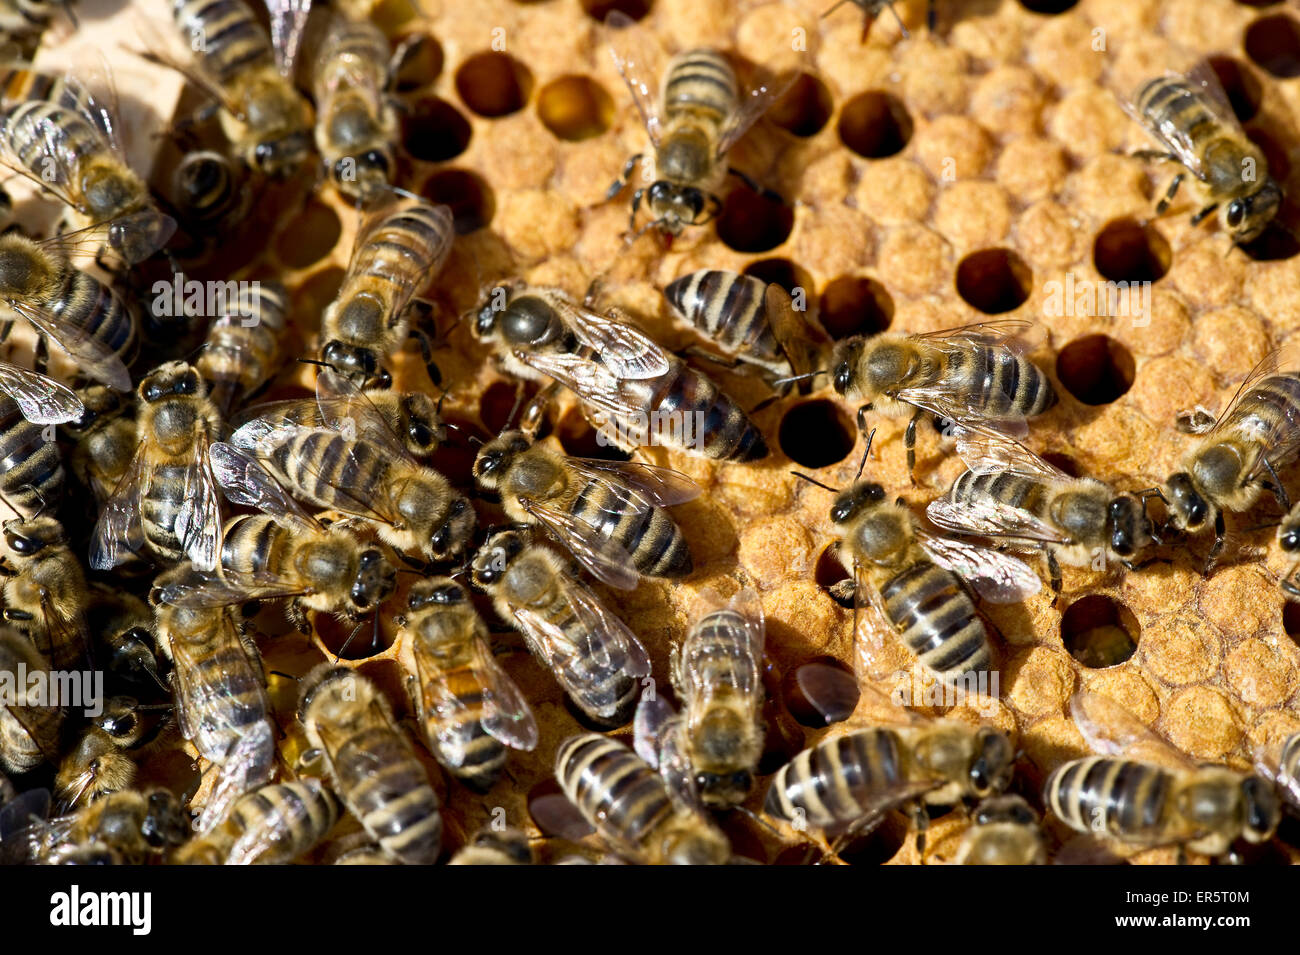 Queen bee and bees on honeycombs, Freiburg im Breisgau, Baden-Wuerttemberg, Germany Stock Photo